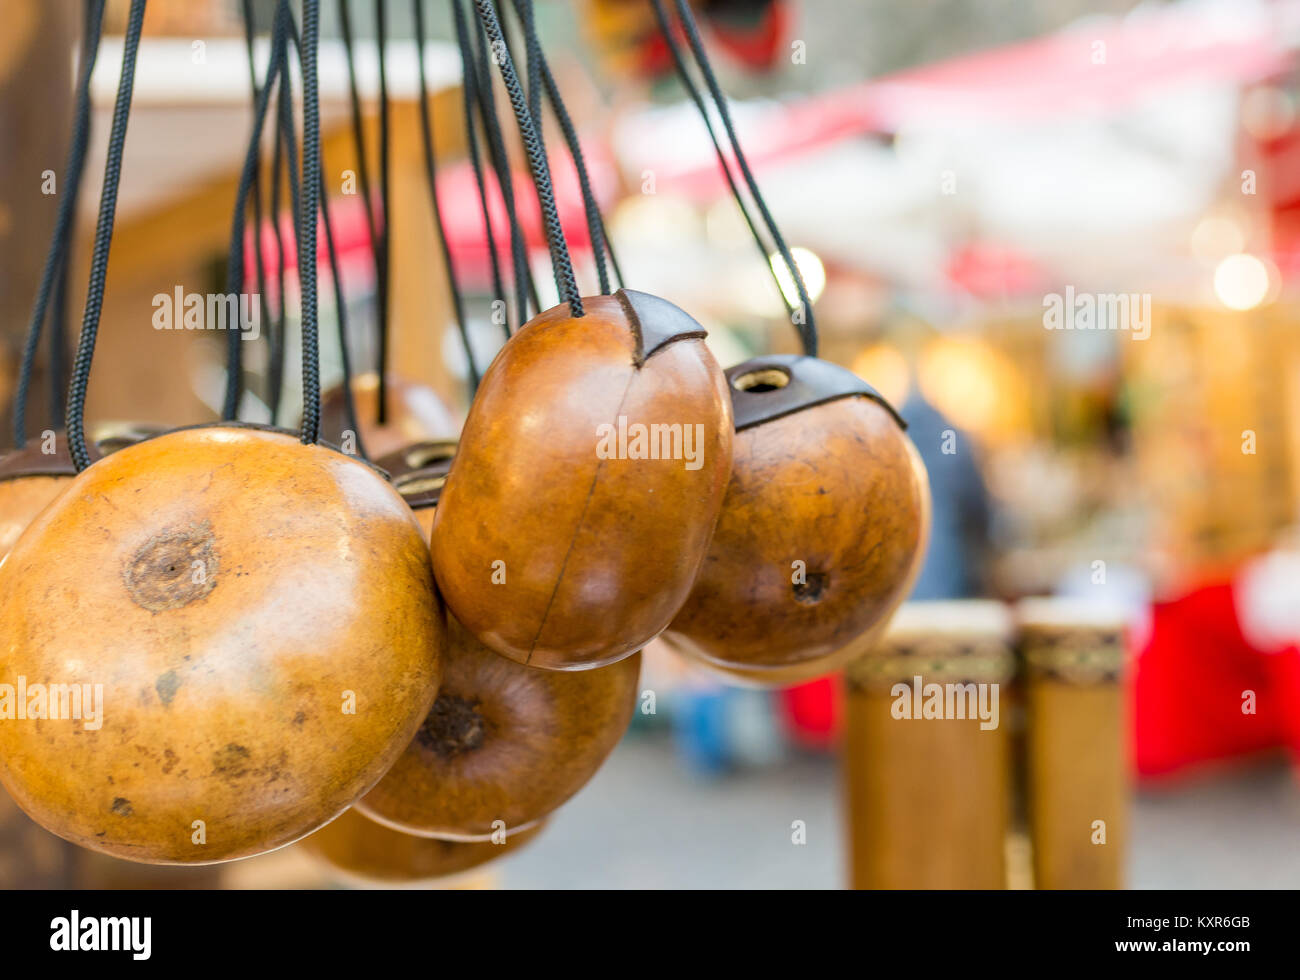 Spanish castanets. Close up of brown castanets, music instruments, rhythm marker. Stock Photo